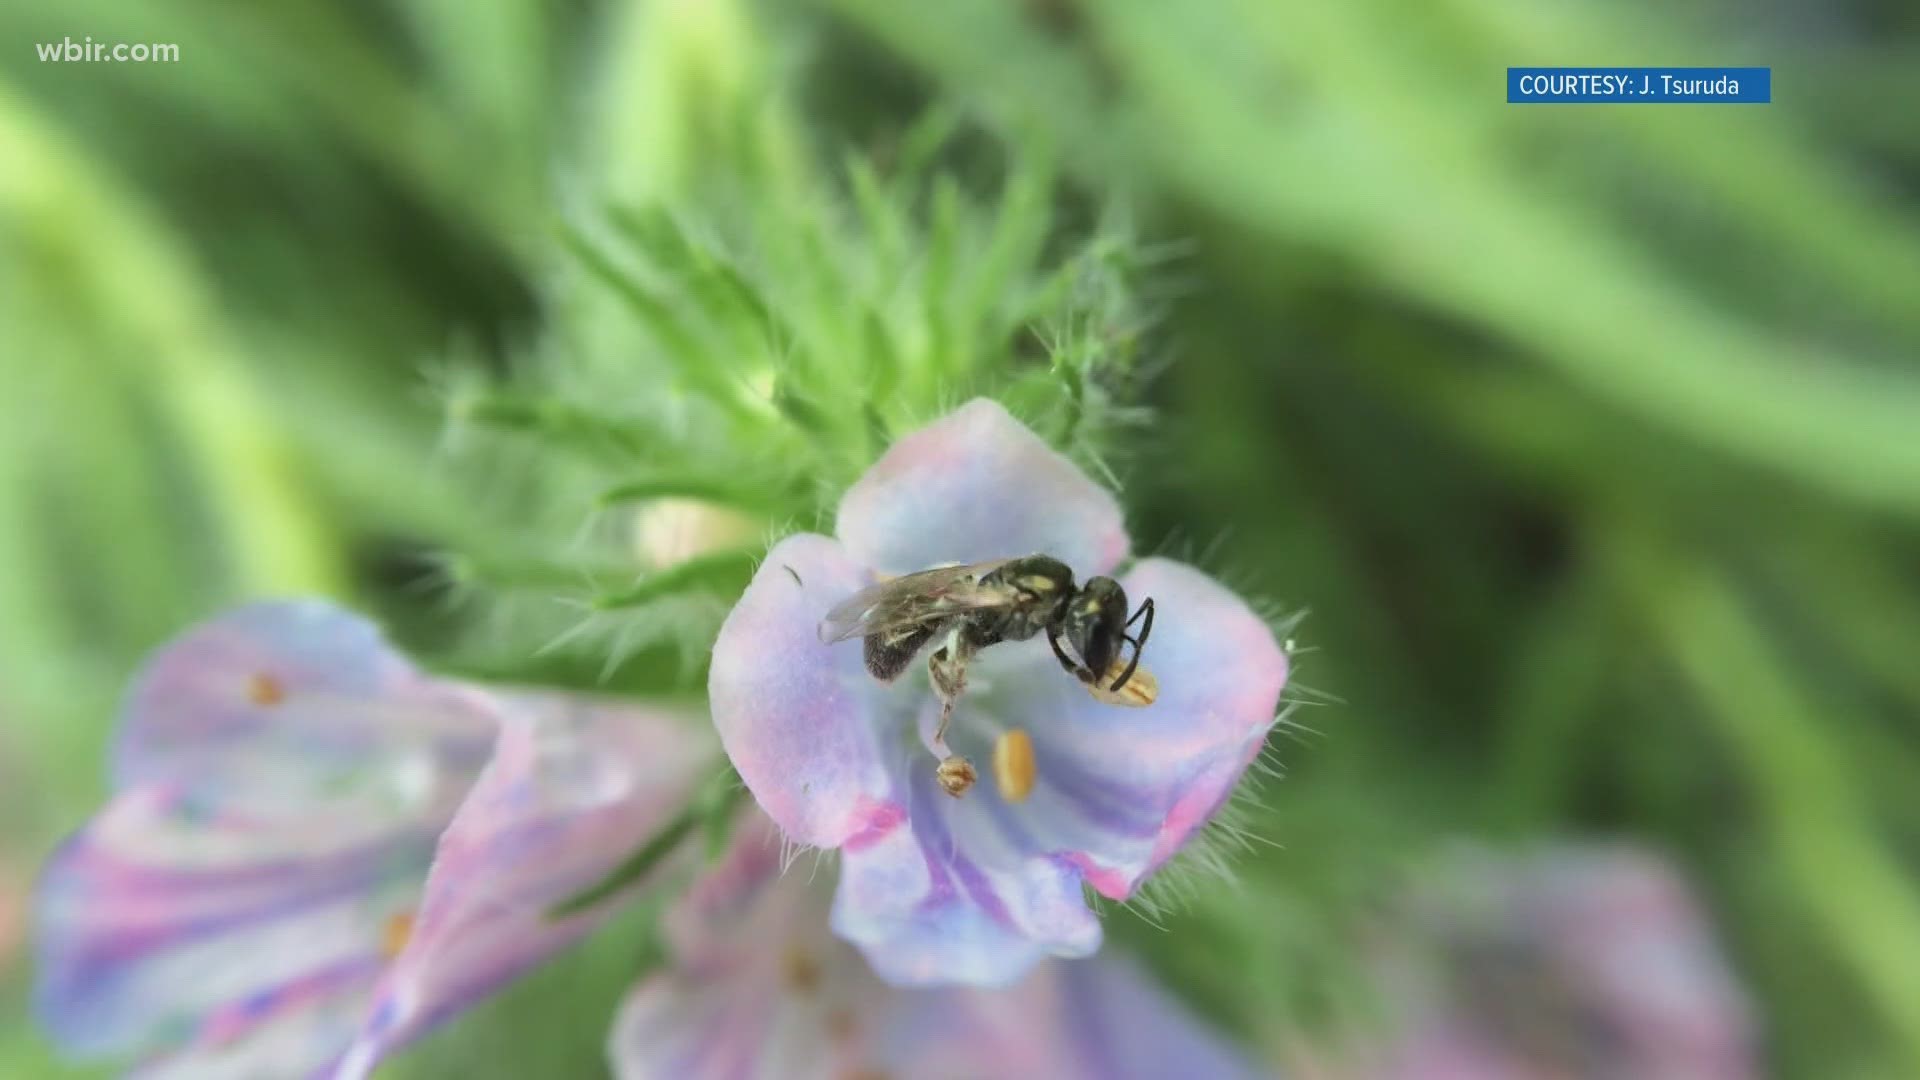 Not all plants are created equal for providing nutrition for these pollinators